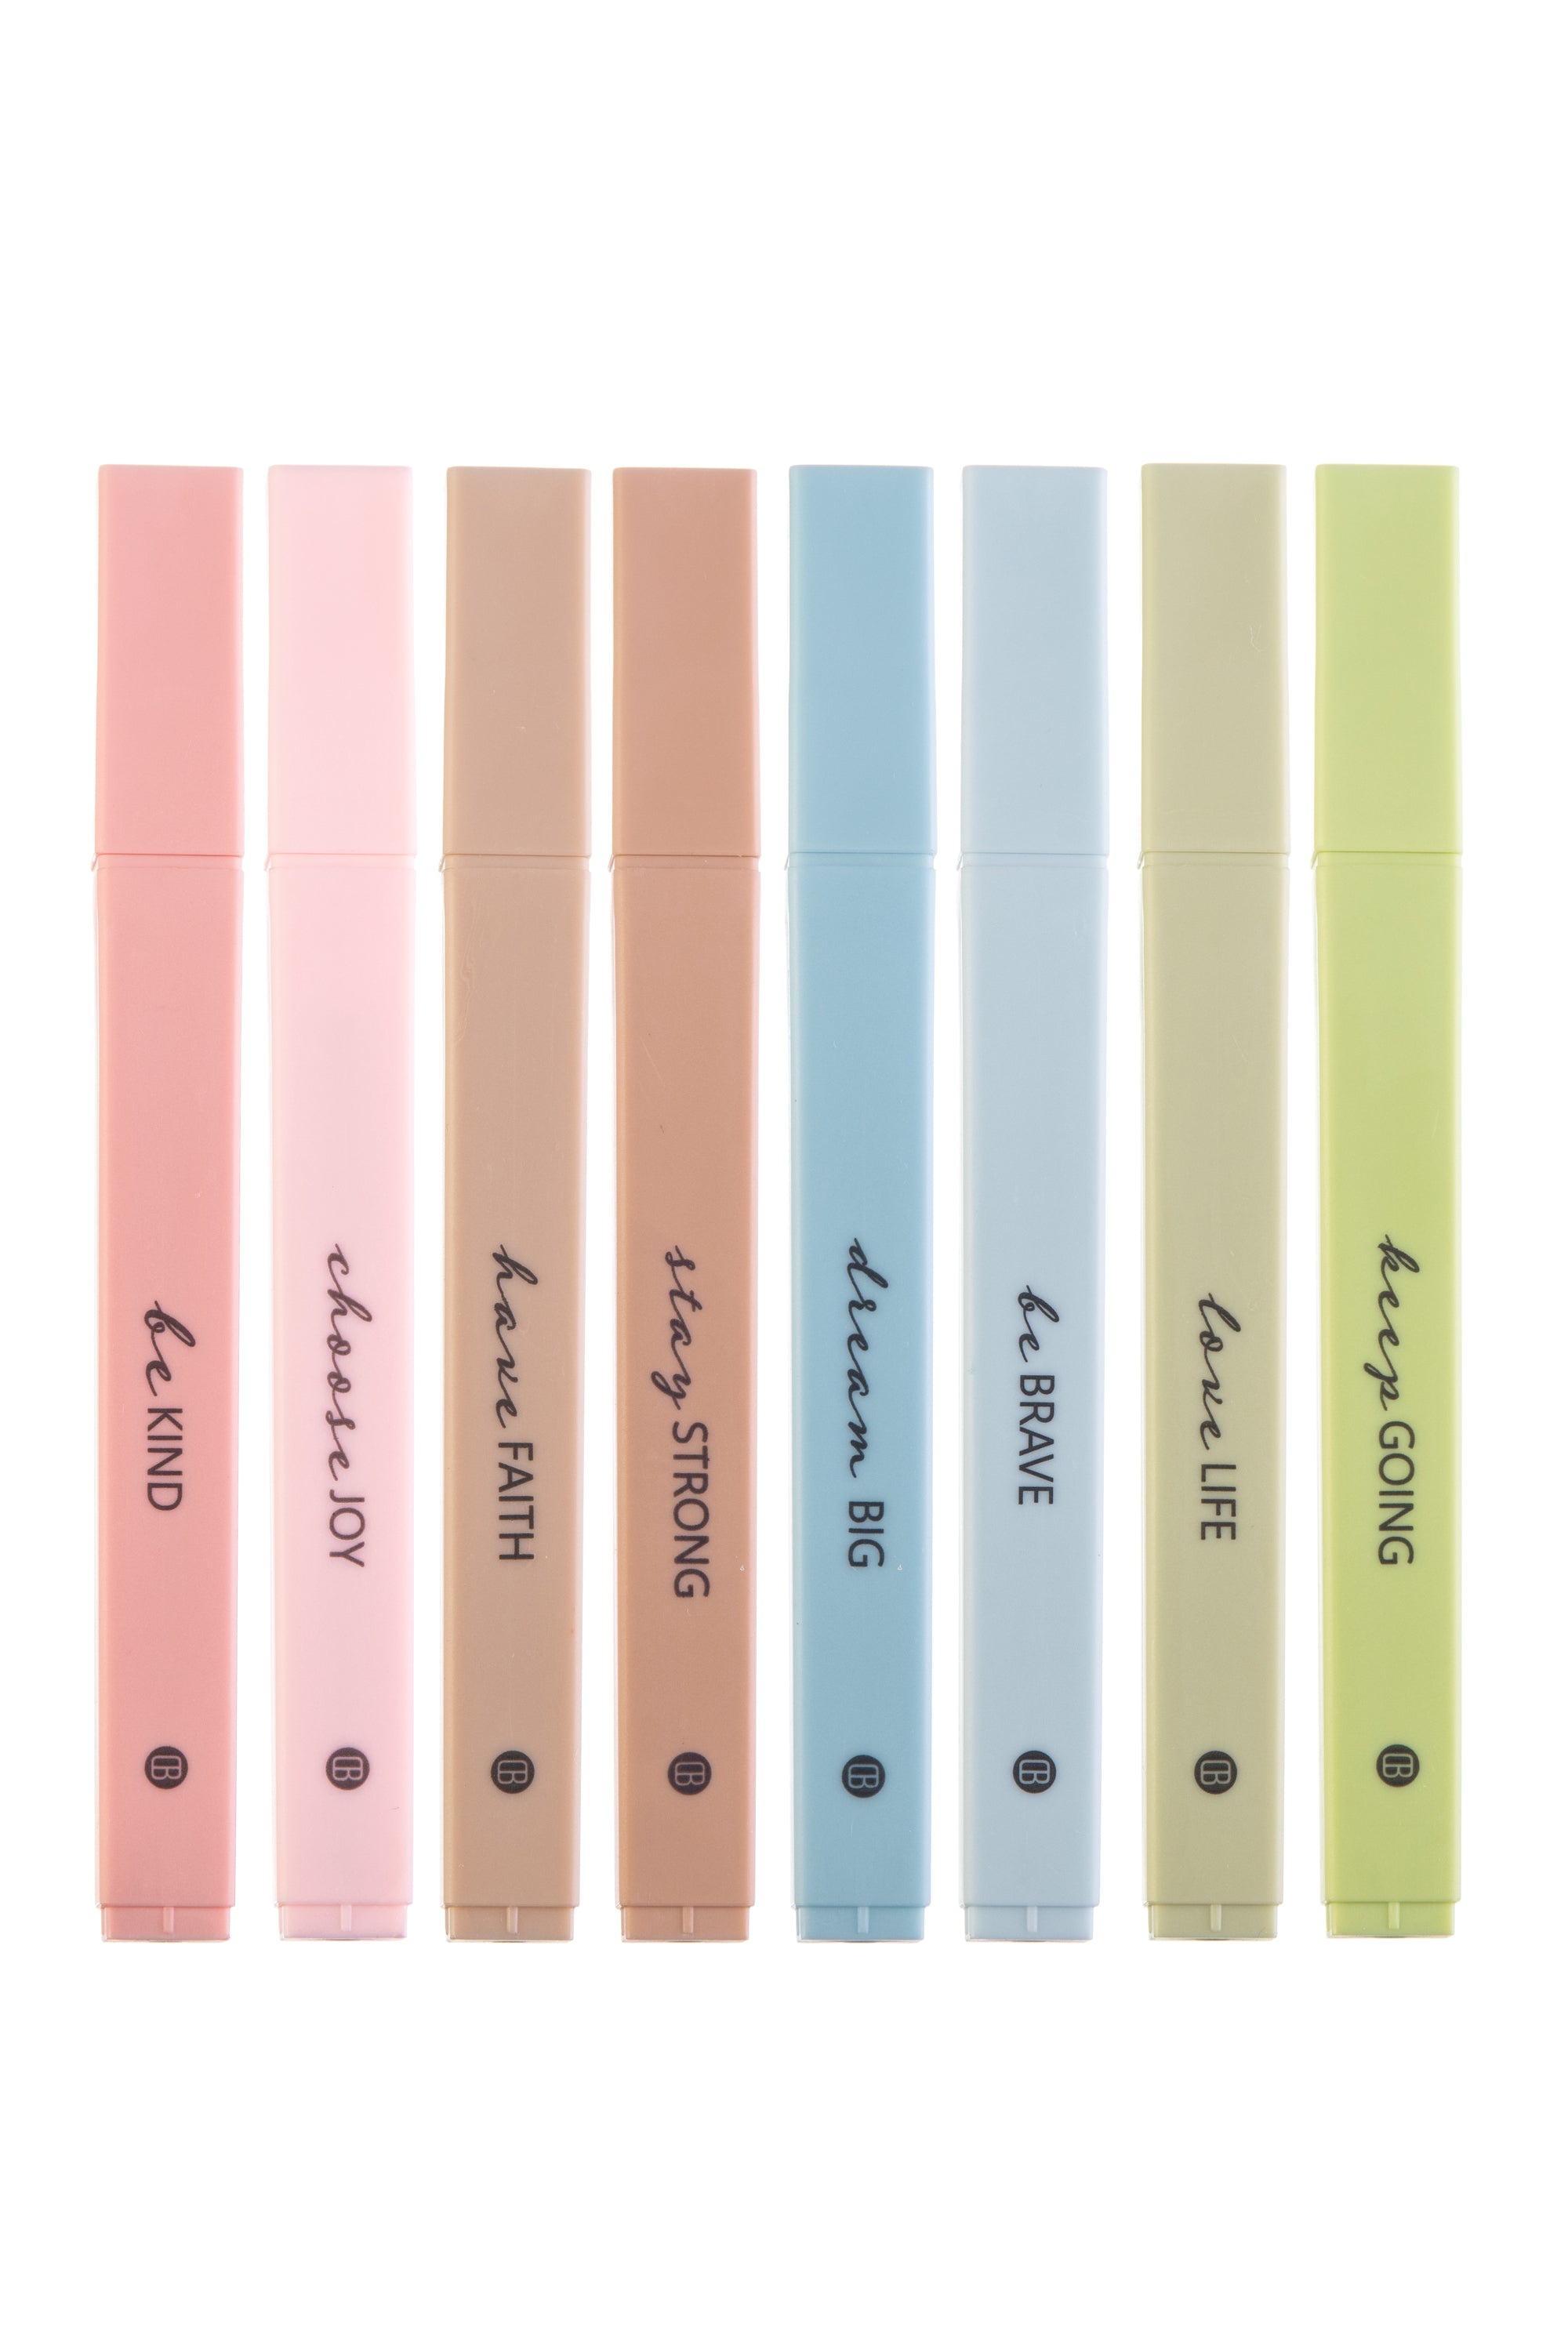 Hi-Lite Pastel Highlighters for Bible - Aesthetic Highlighters with Soft  Chiseled Tip - No Bleed Highlighter Pens for Planner, Notes, Books - Desk